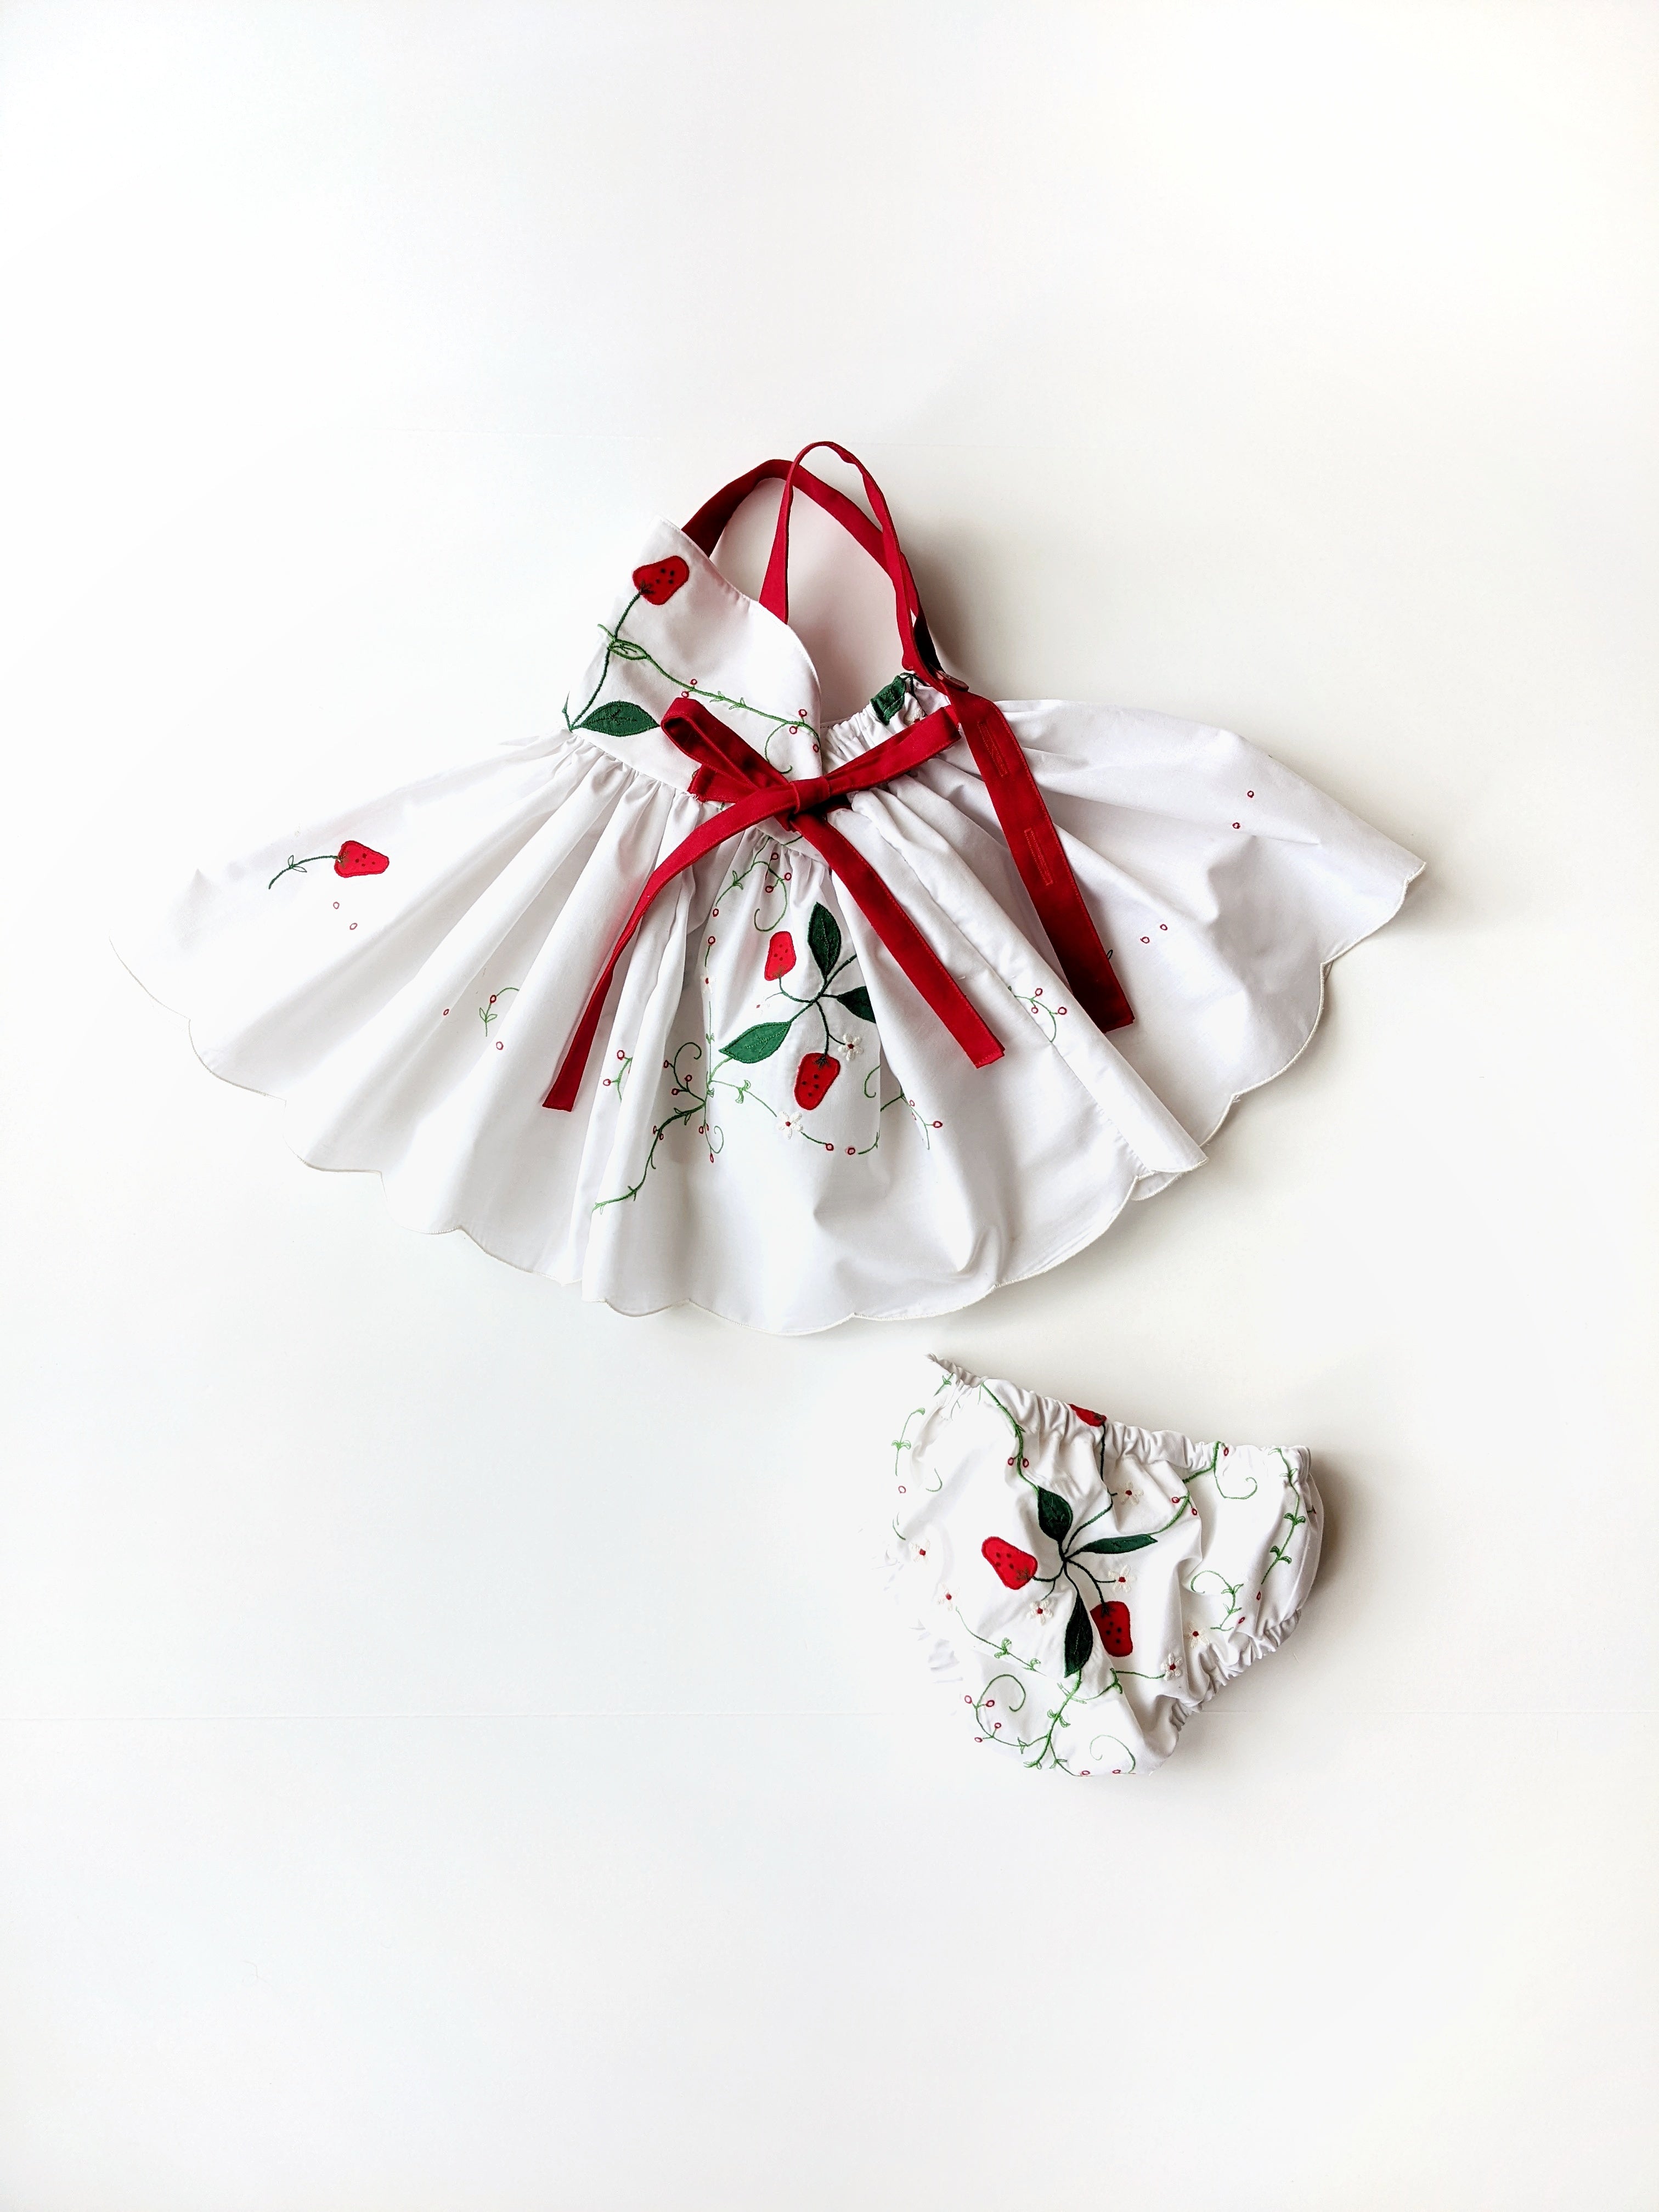 "Dahlia" style dress + bloomers set - Size 12/18 months